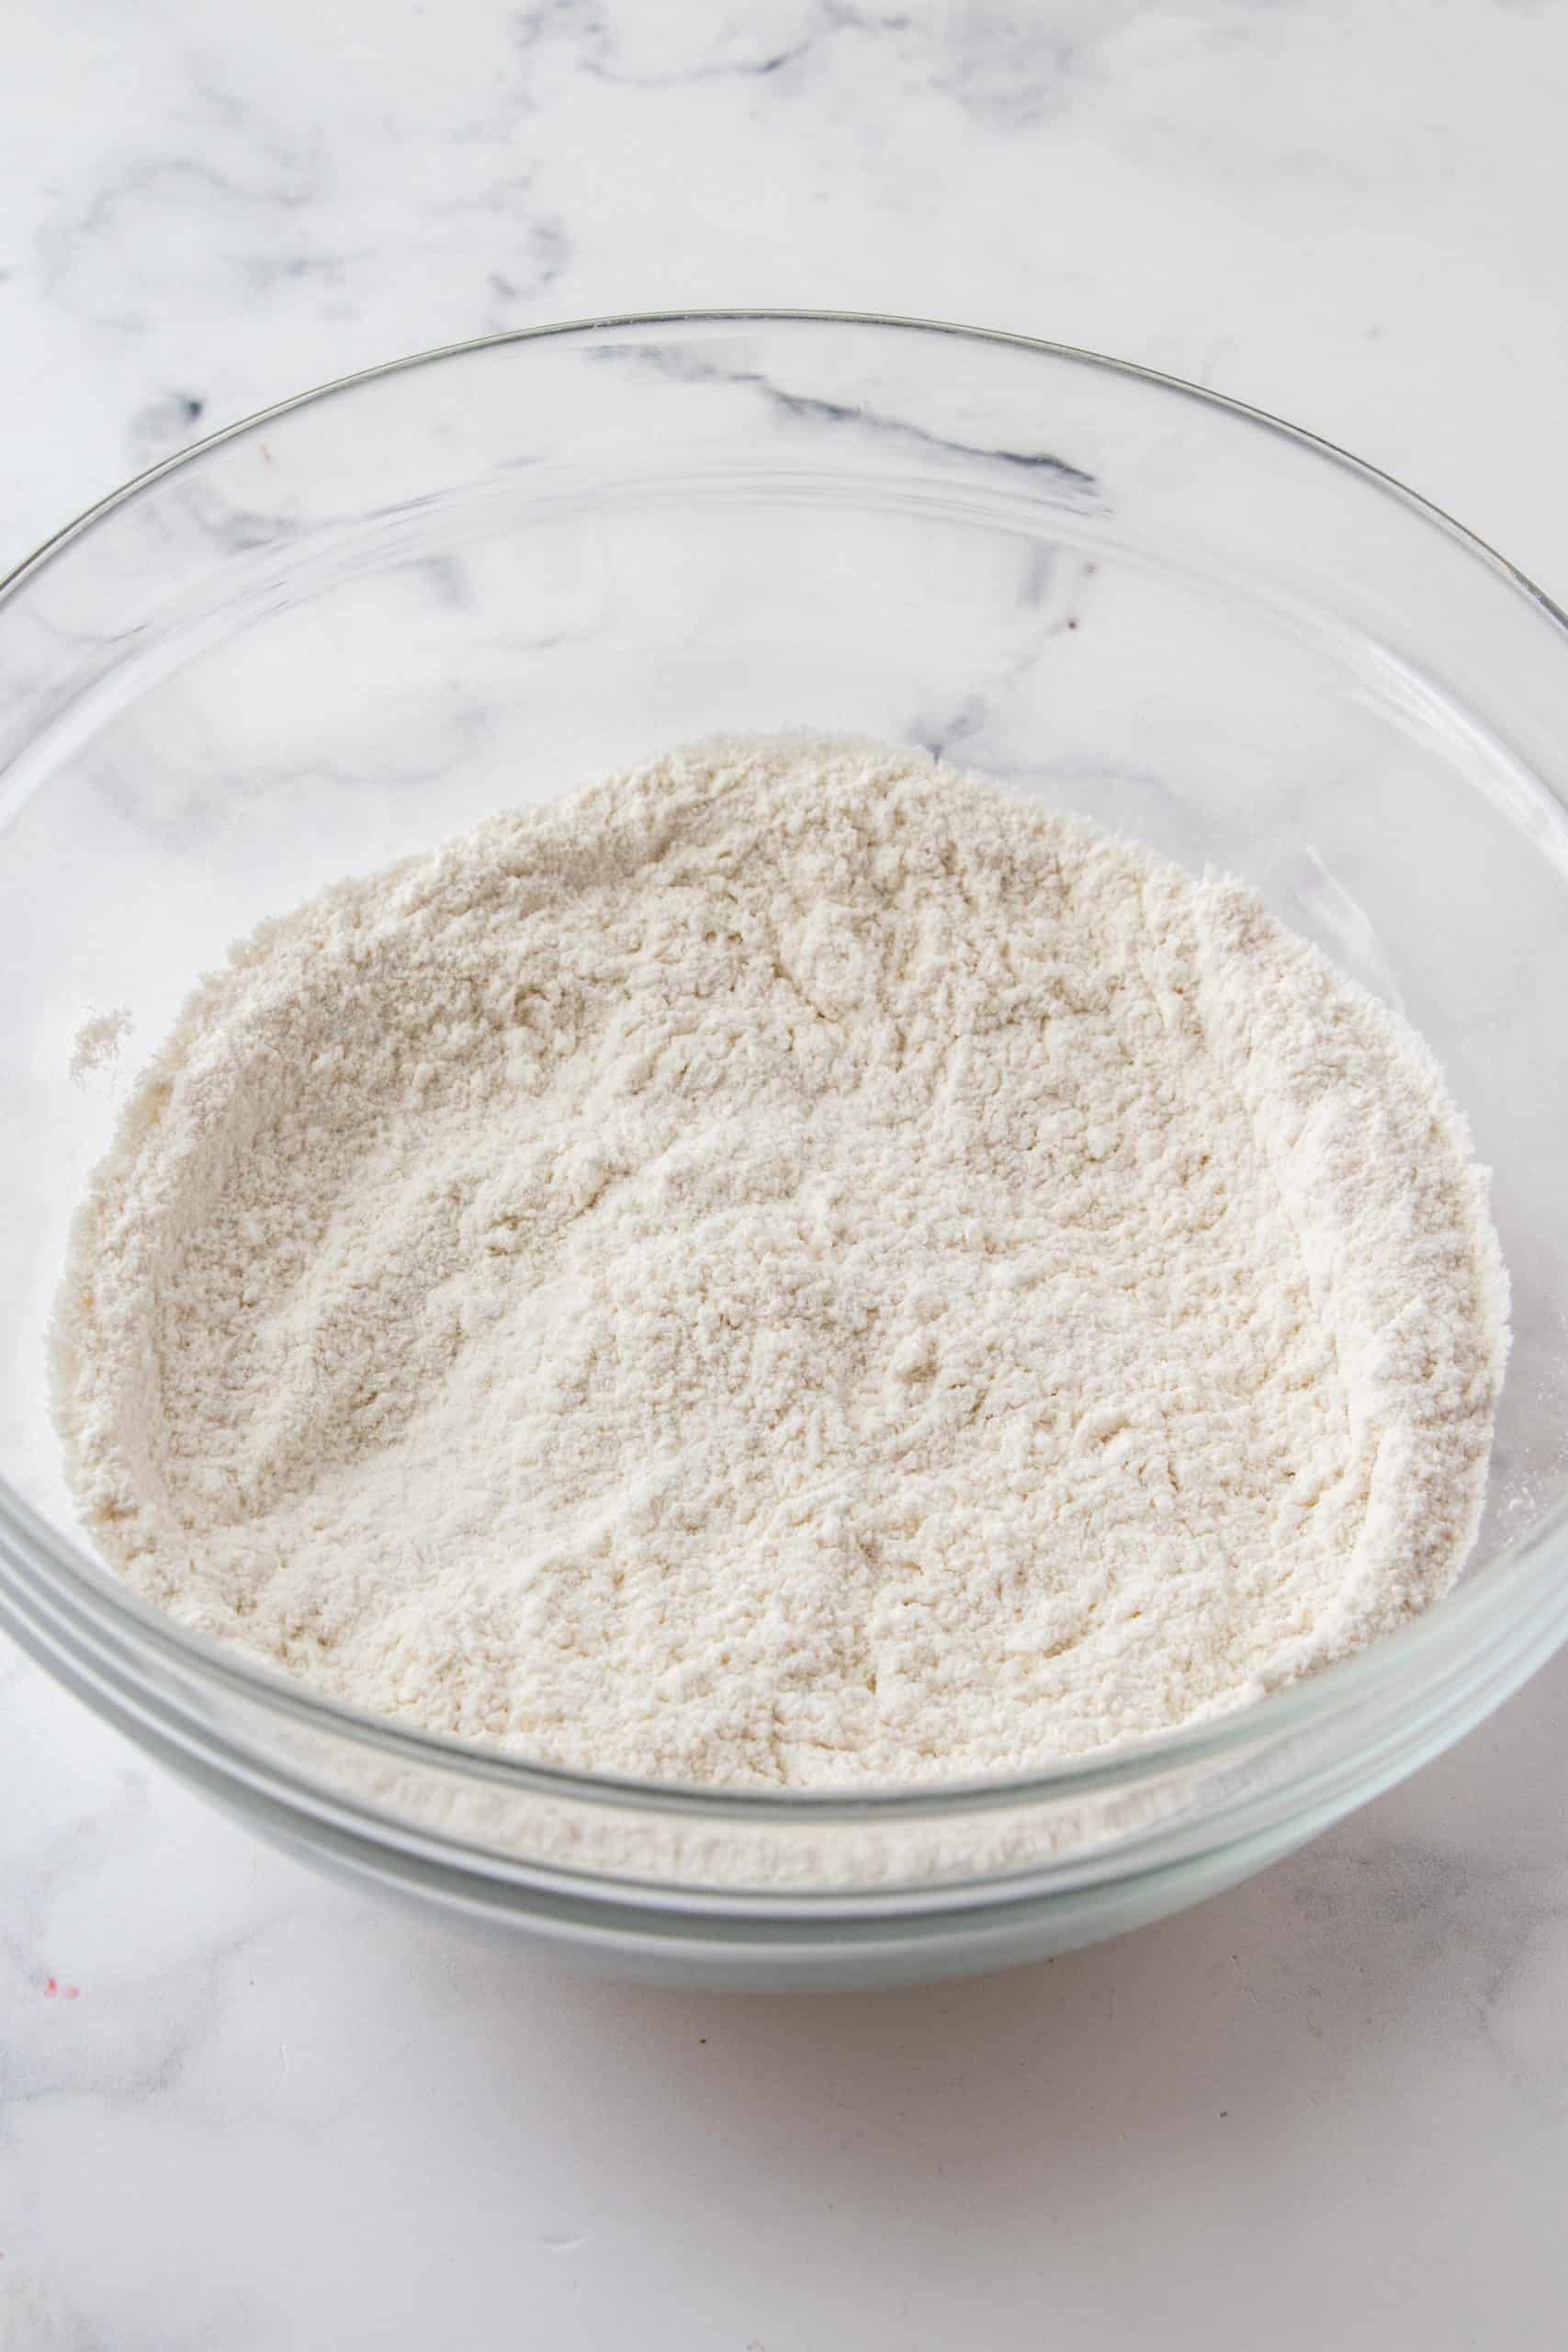 Flour mixture whisked together in bowl.